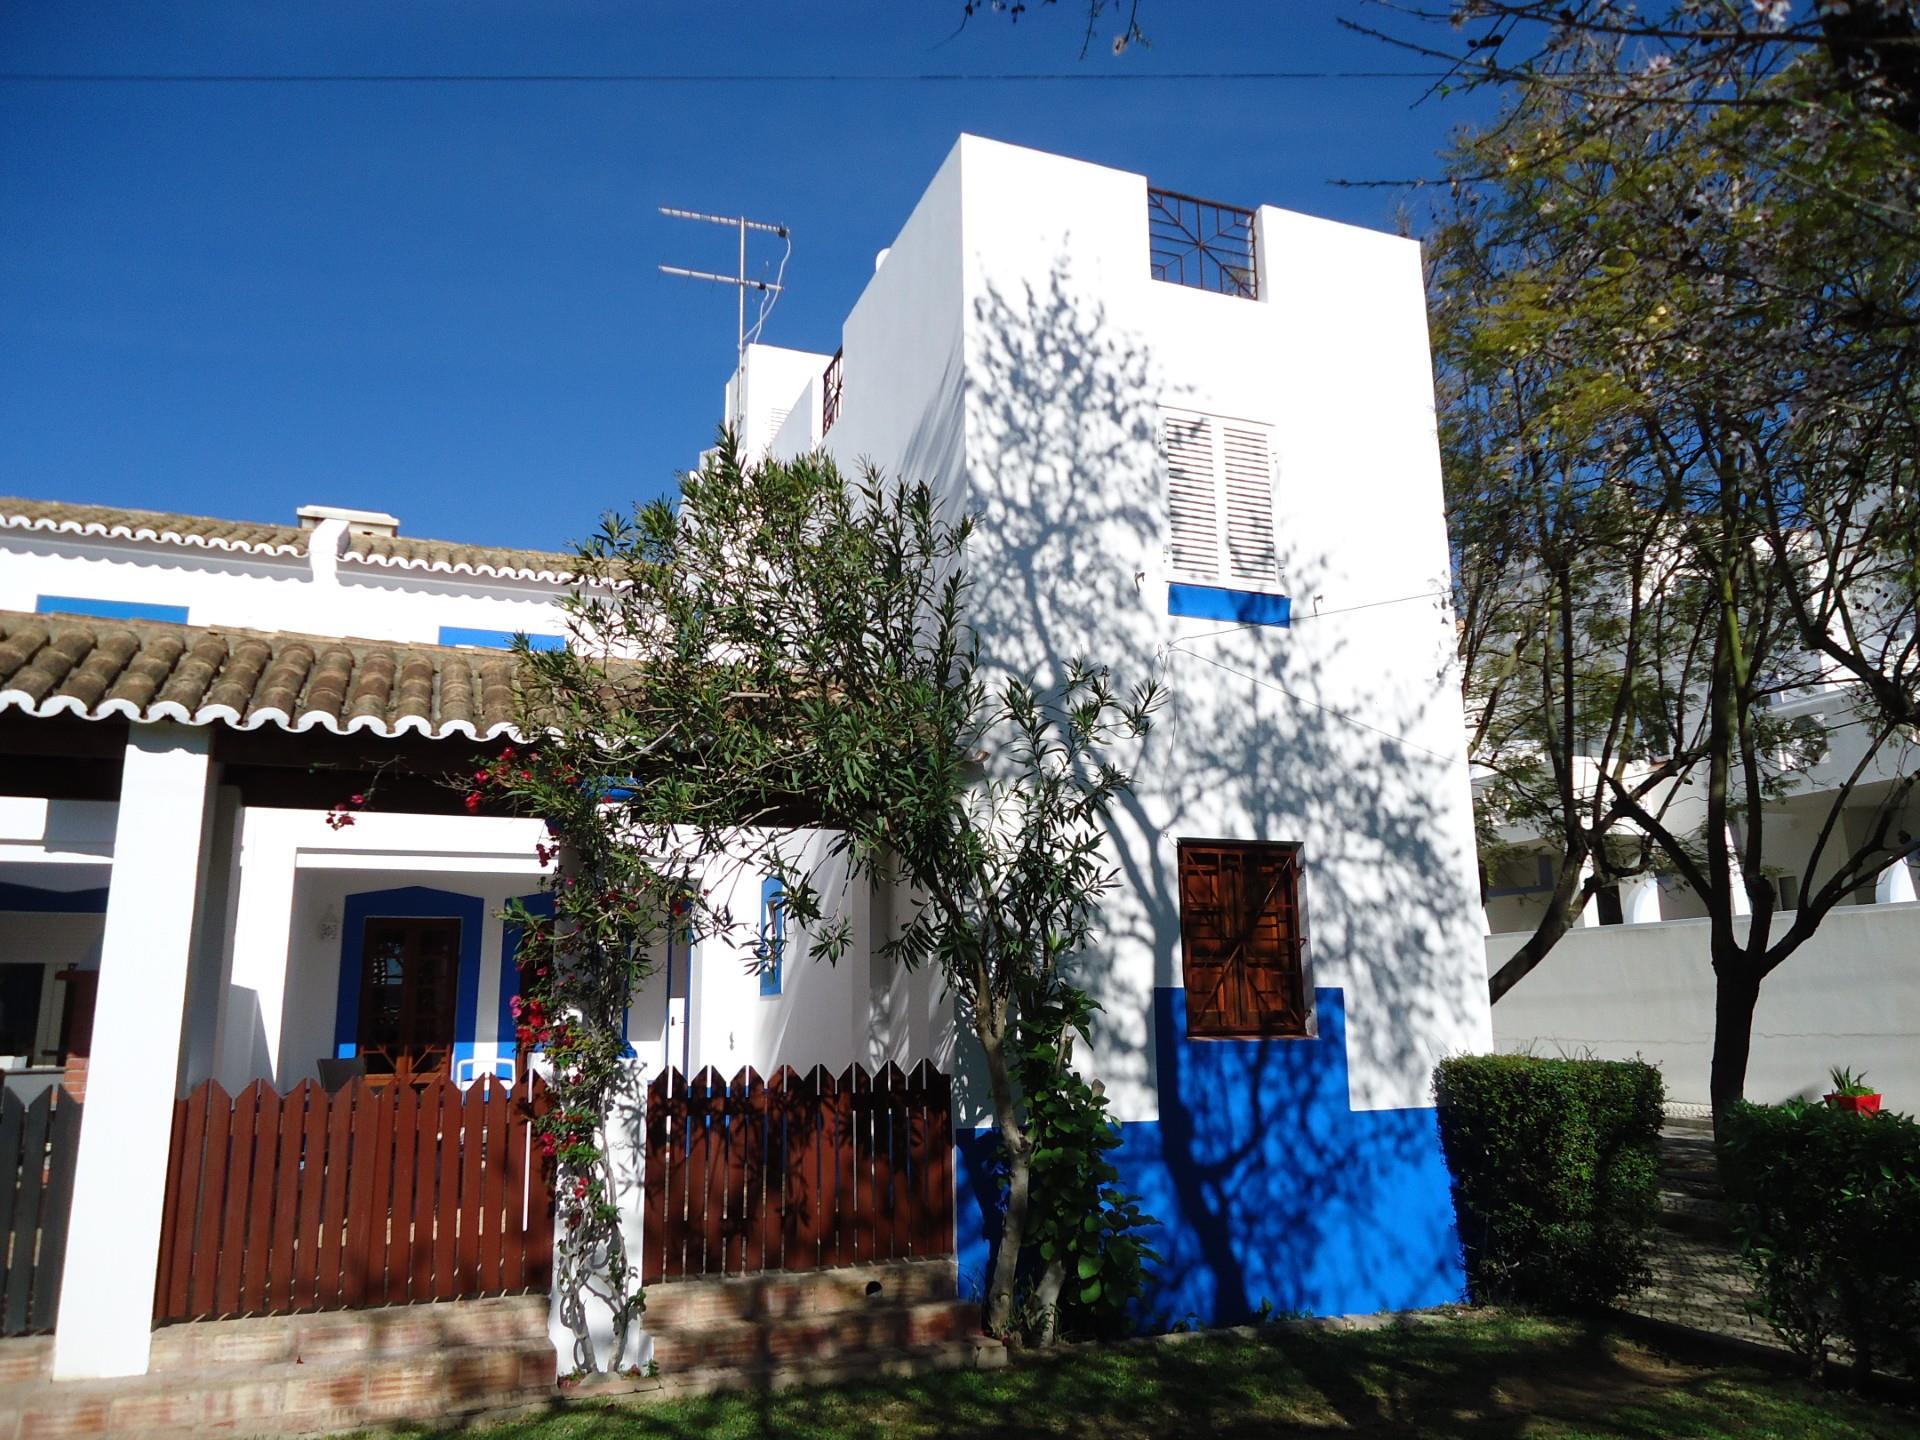 3 Bed Villa With Patio, Roof Terrace And Access  To S. Pool - Cabanas